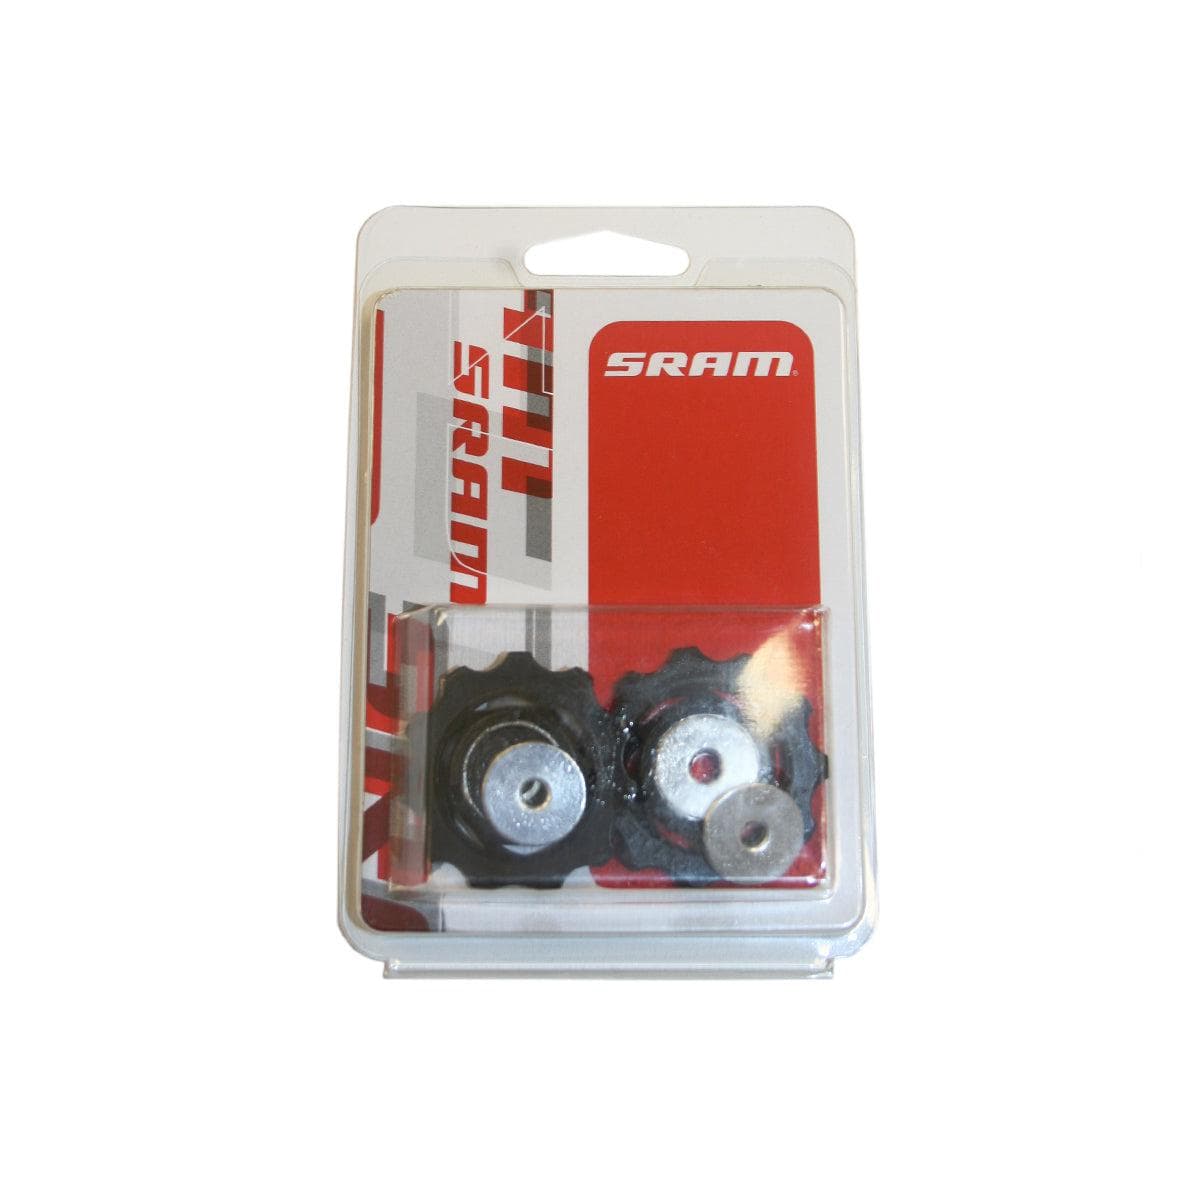 Sram Spare - Rear Derailleur (10 Speed) Pulley Kit Force Rival Apex: